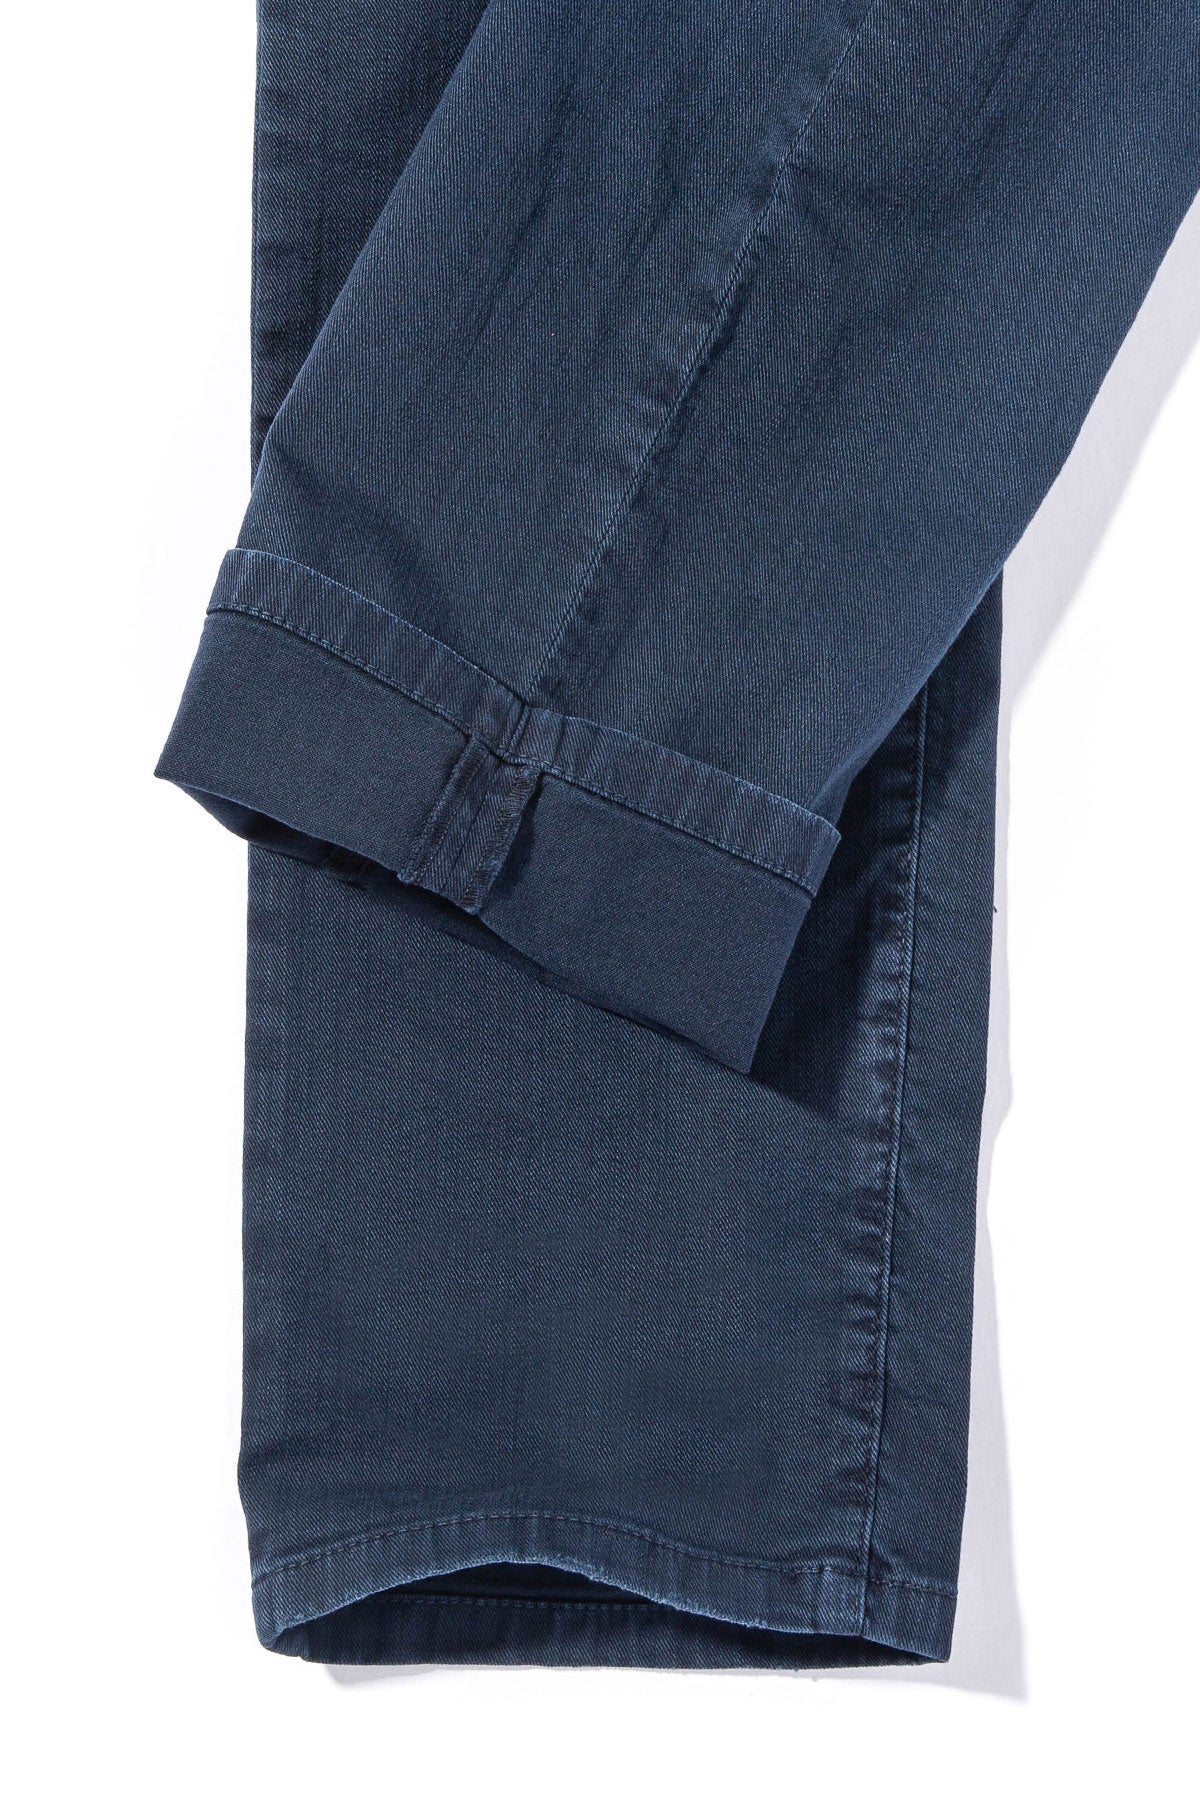 Ouray 5-Pocket Stretch Twill in Blue/Navy | Mens - Pants - 5 Pocket | Teleria Zed